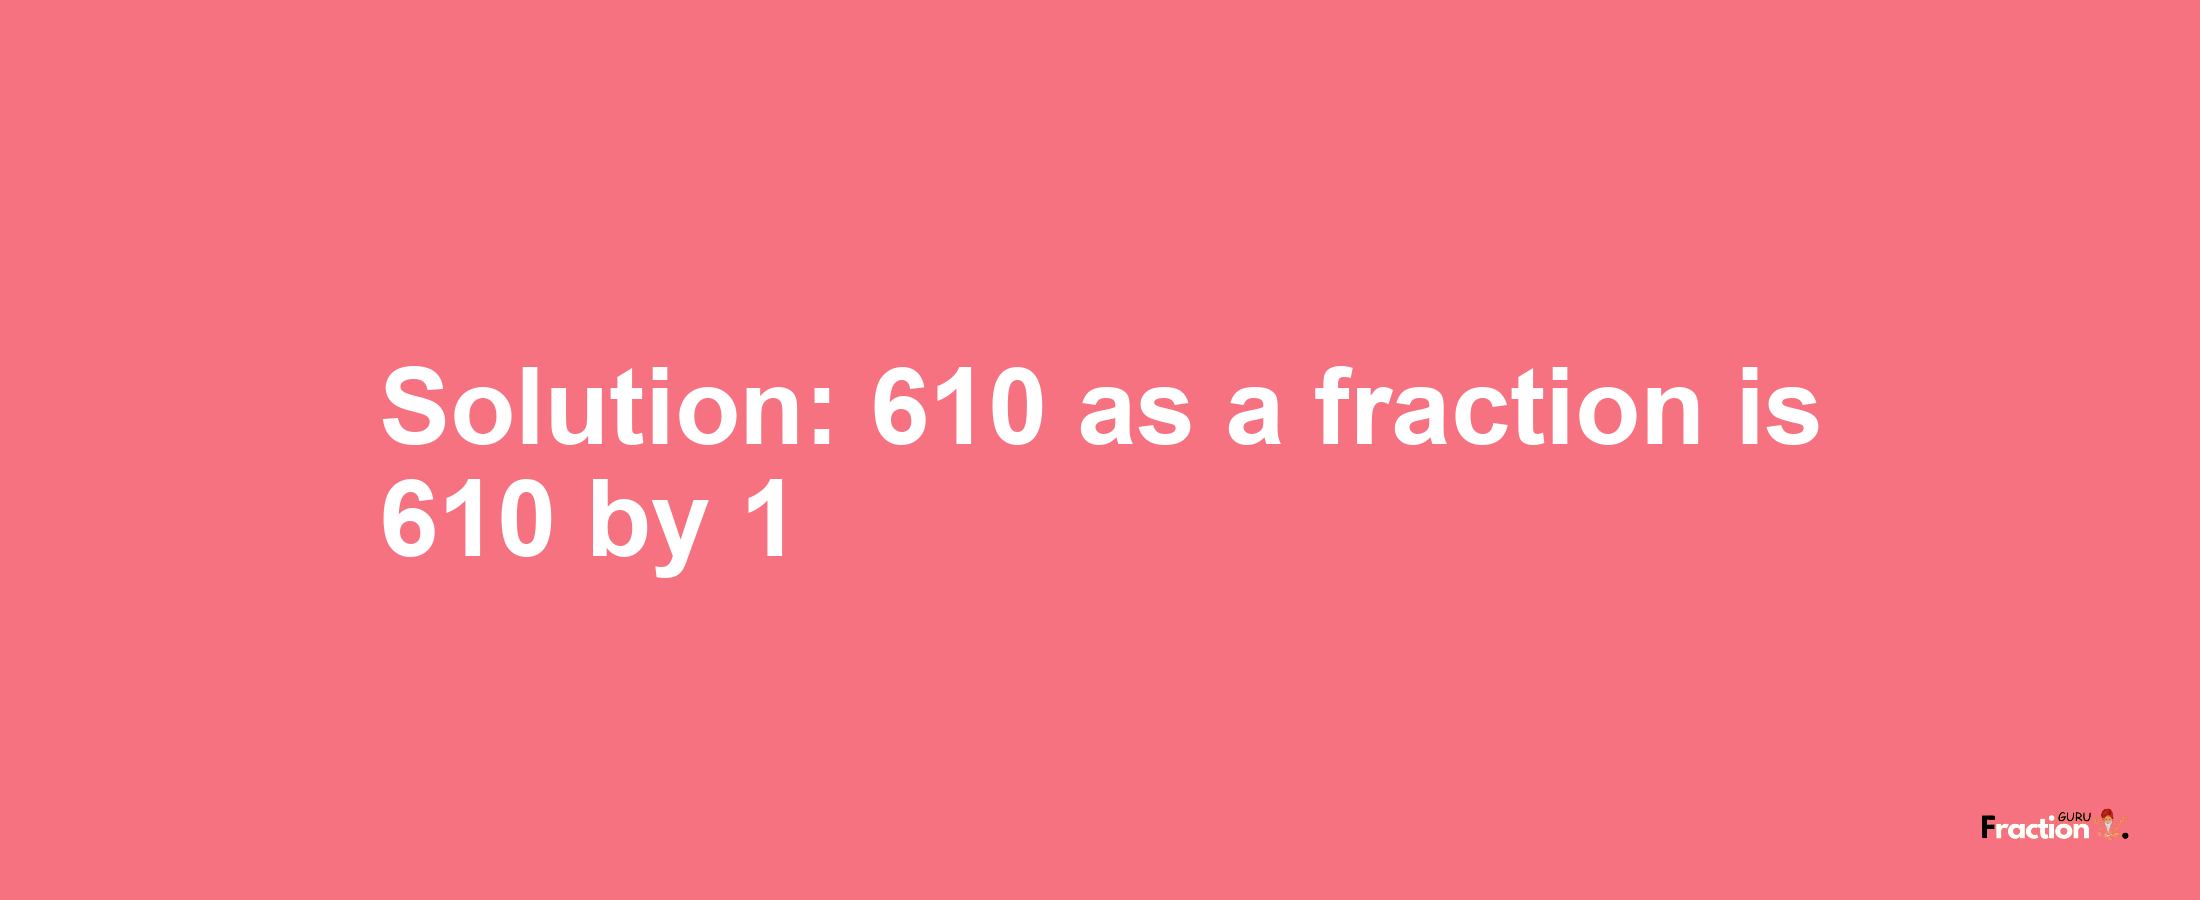 Solution:610 as a fraction is 610/1